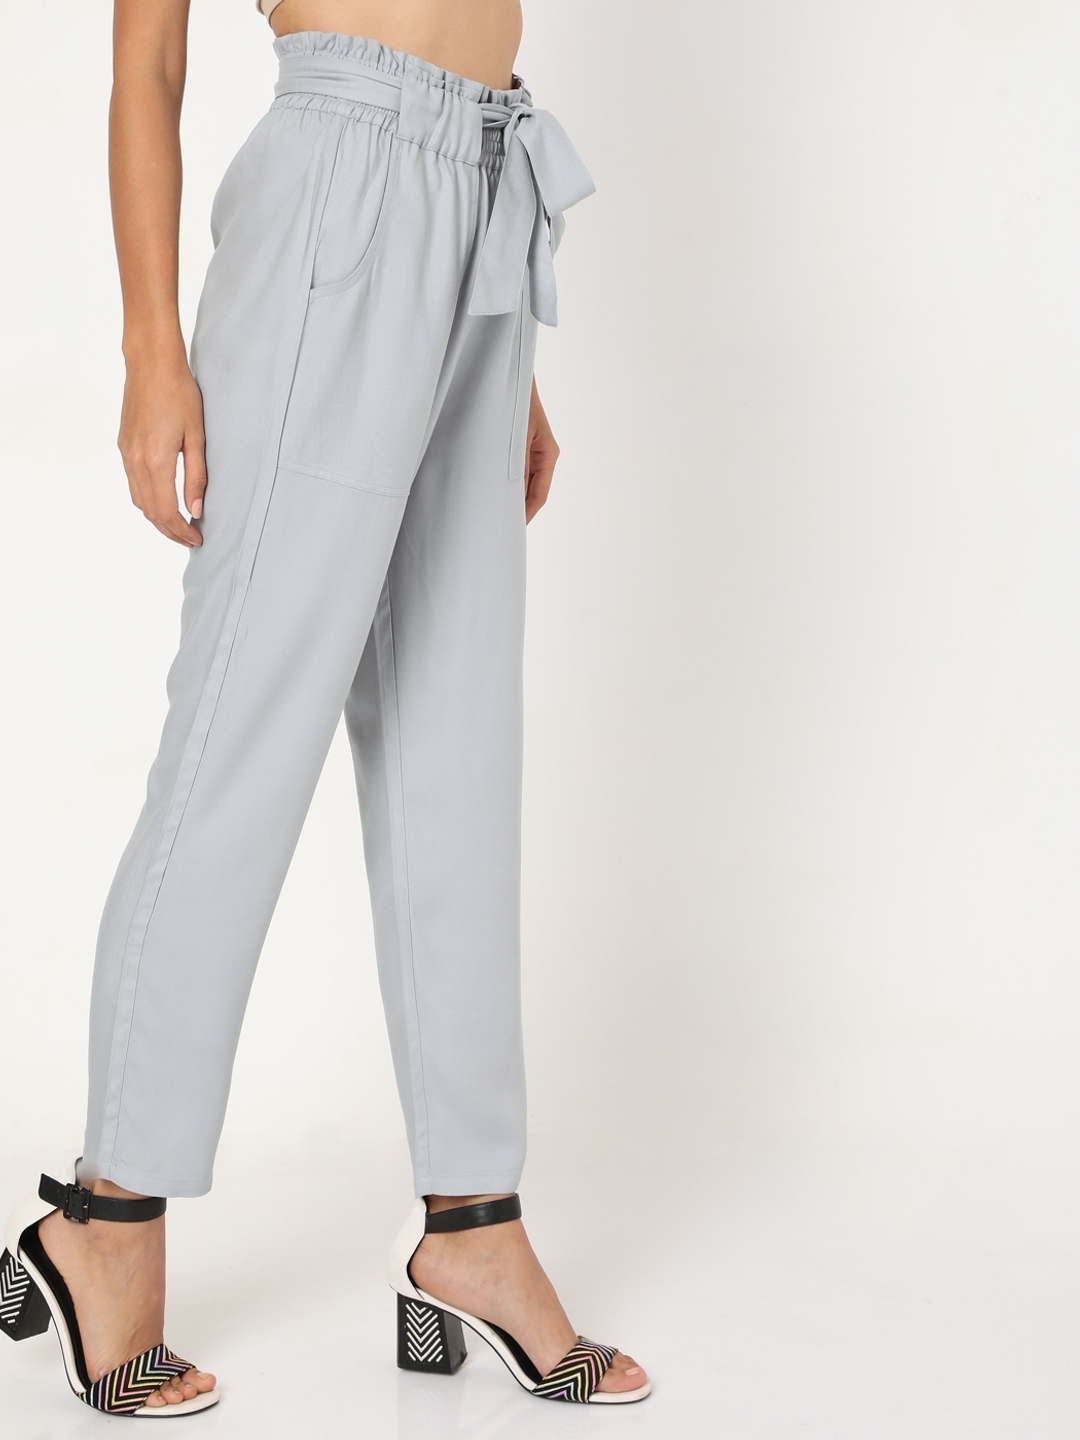 Frontwalk Womens Cotton Linen Loose Fit Casual Pants India | Ubuy